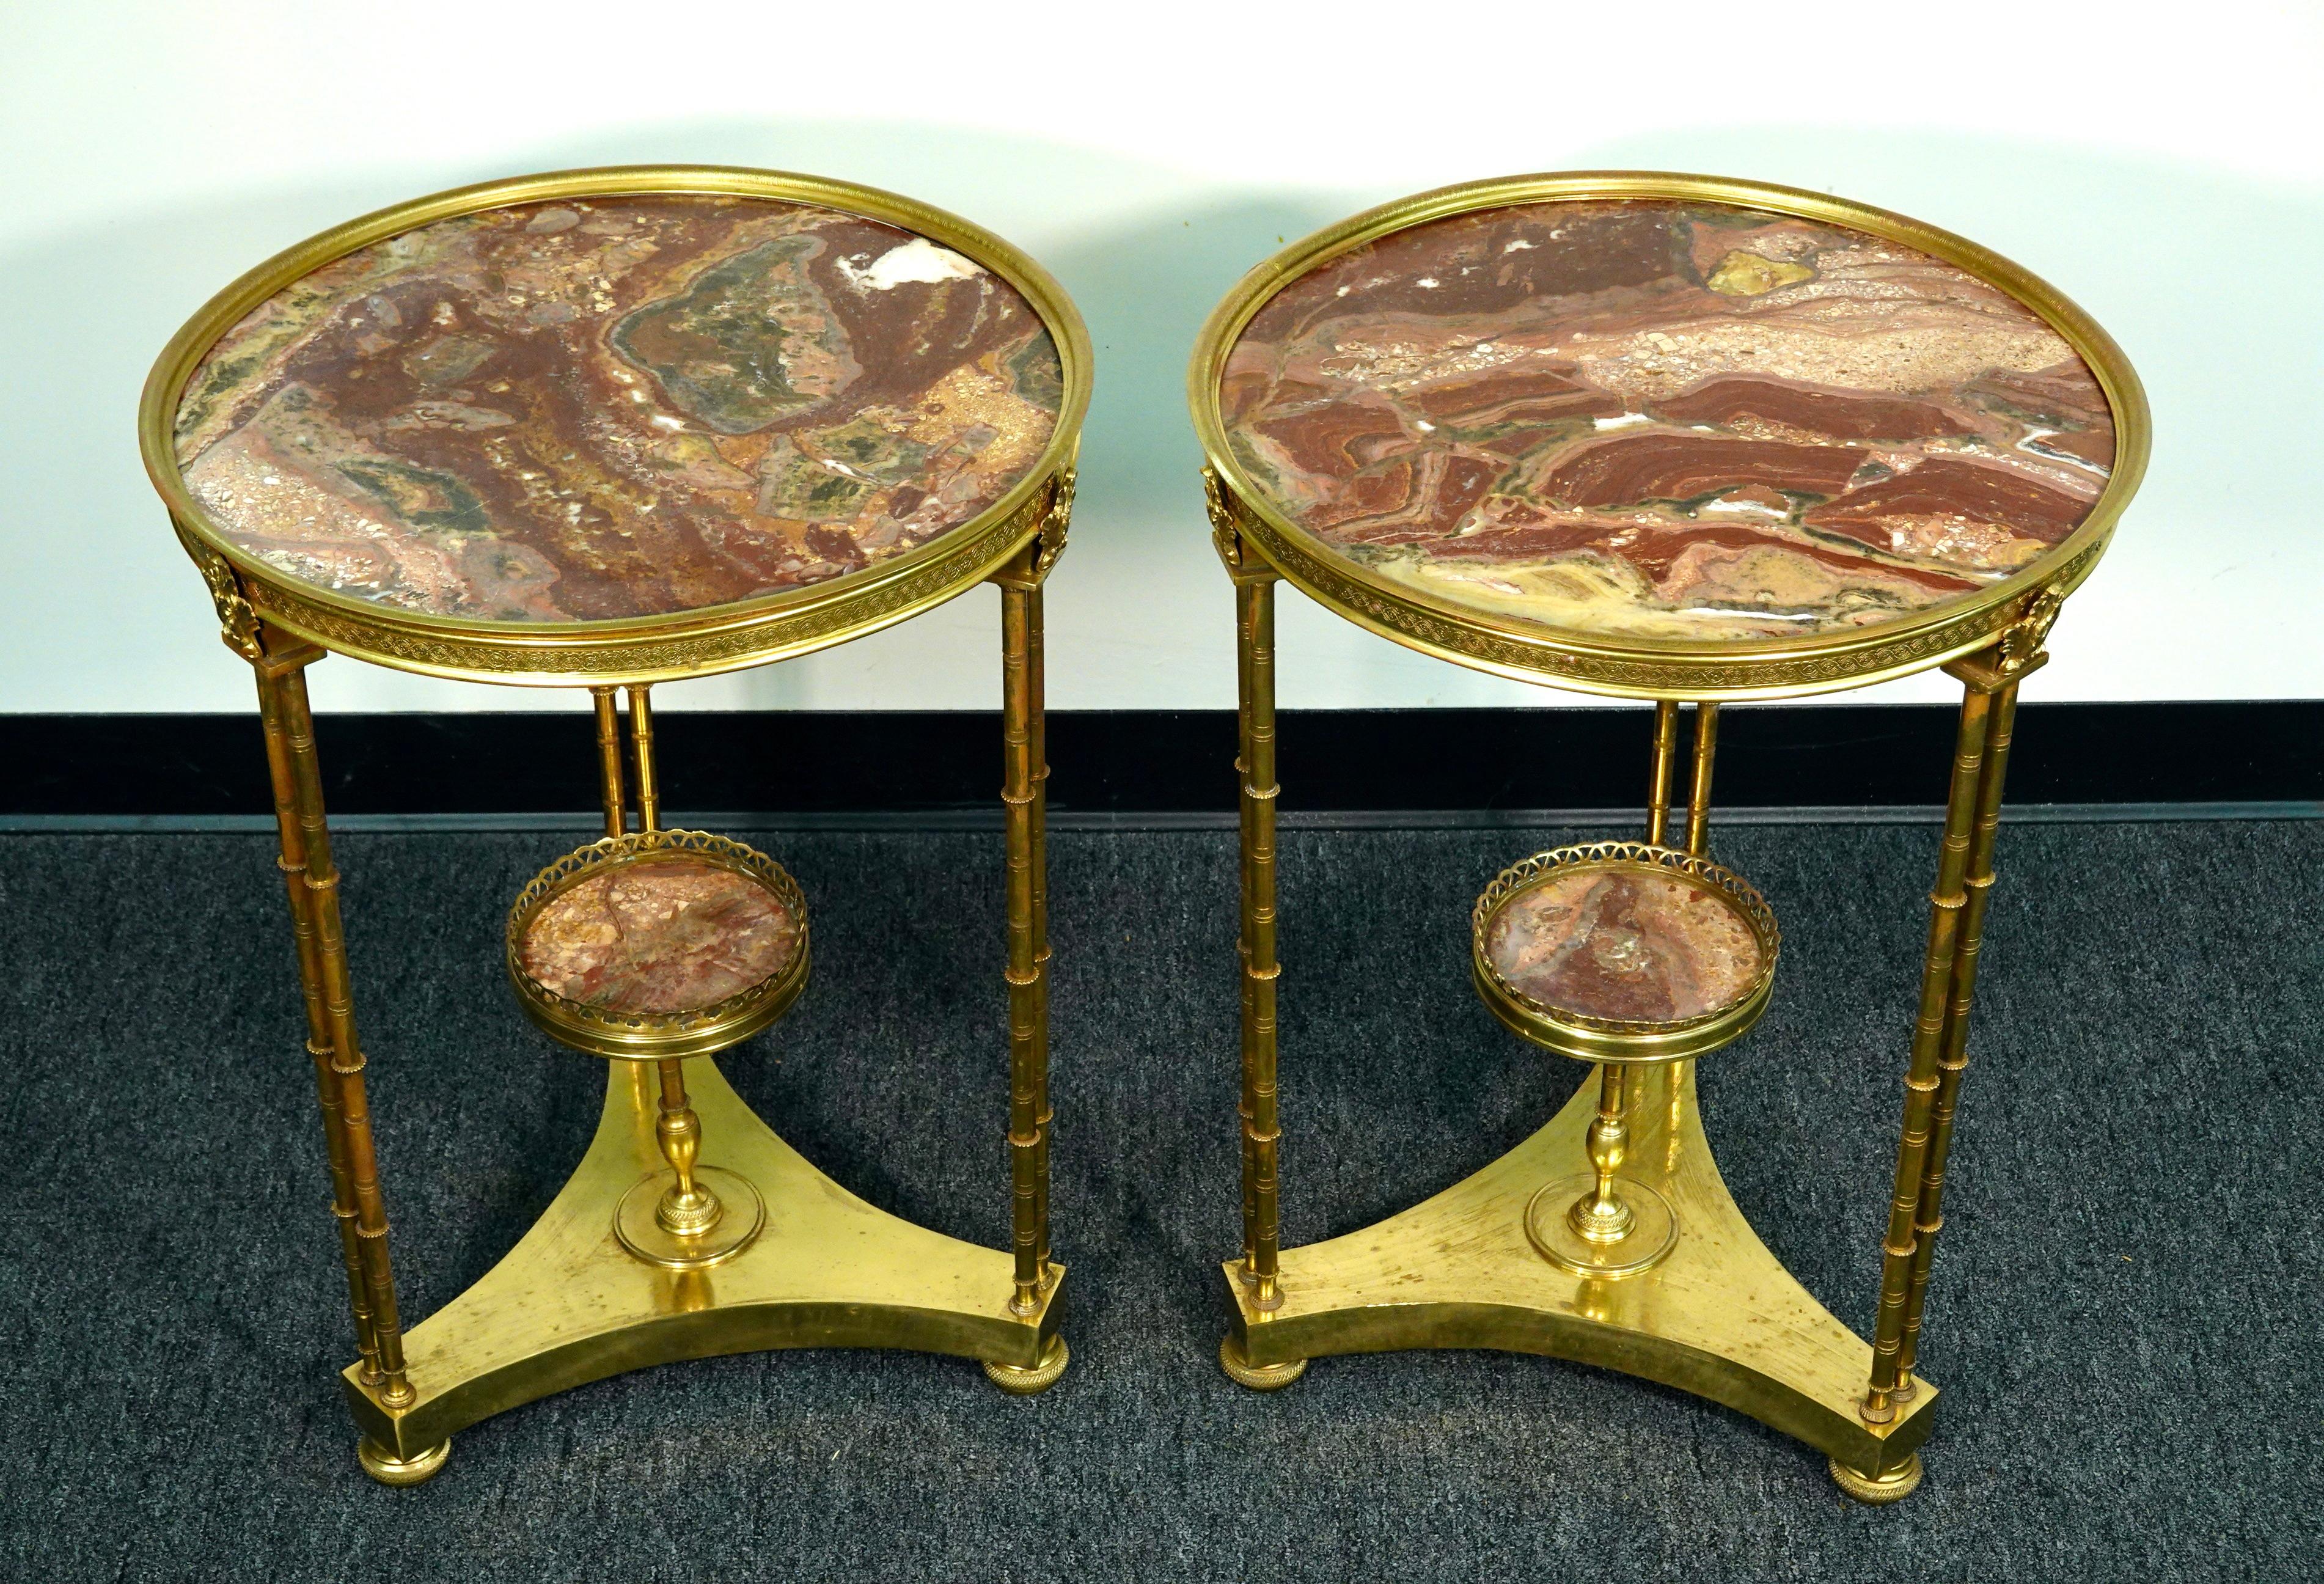 A pair of French Louis XVI style gilt-bronze gueridon tables with lovely variegated marble tops, after the model by Adam Weisweiler (Master, 1778) (French, circa mid-20th century).  Each of these elegant gueridons has a circular breche d'alep marble